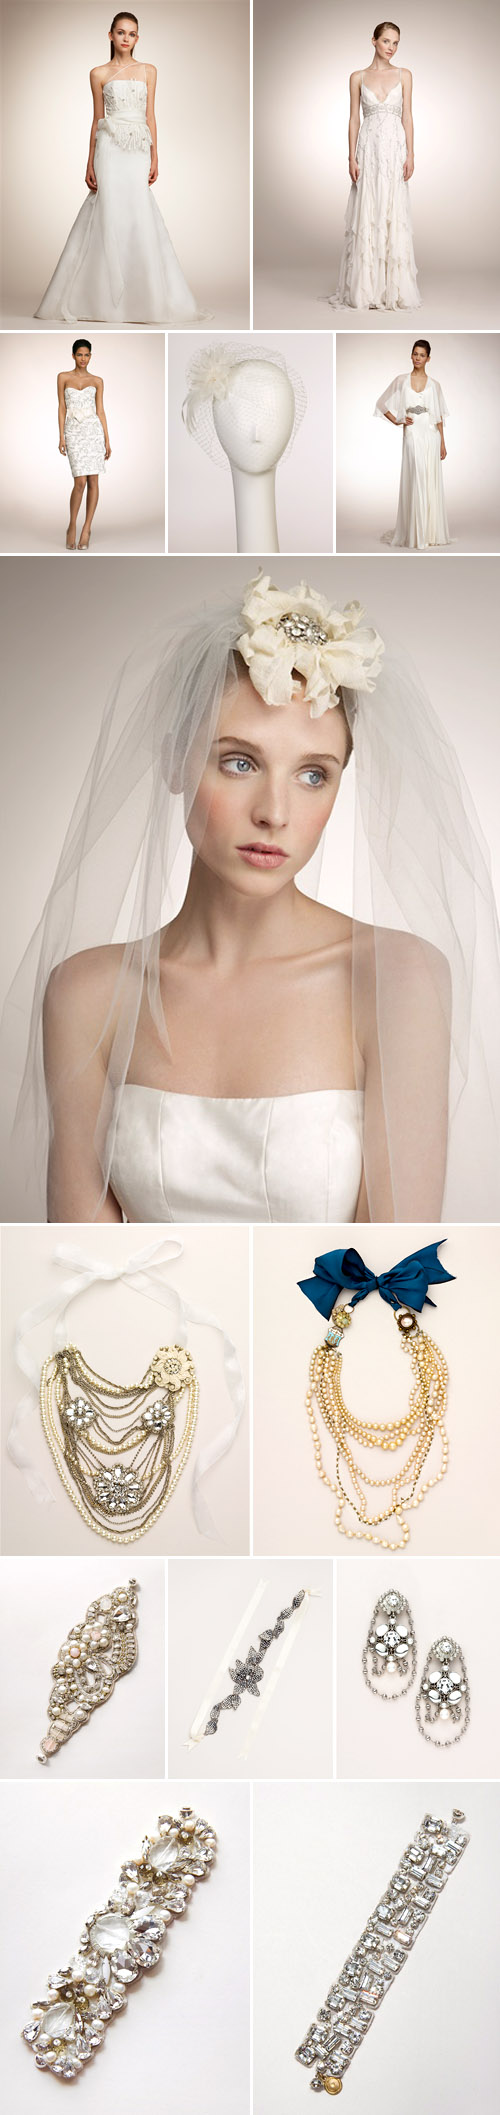 wedding dresses, jewelry and accessories from The Aisle New York